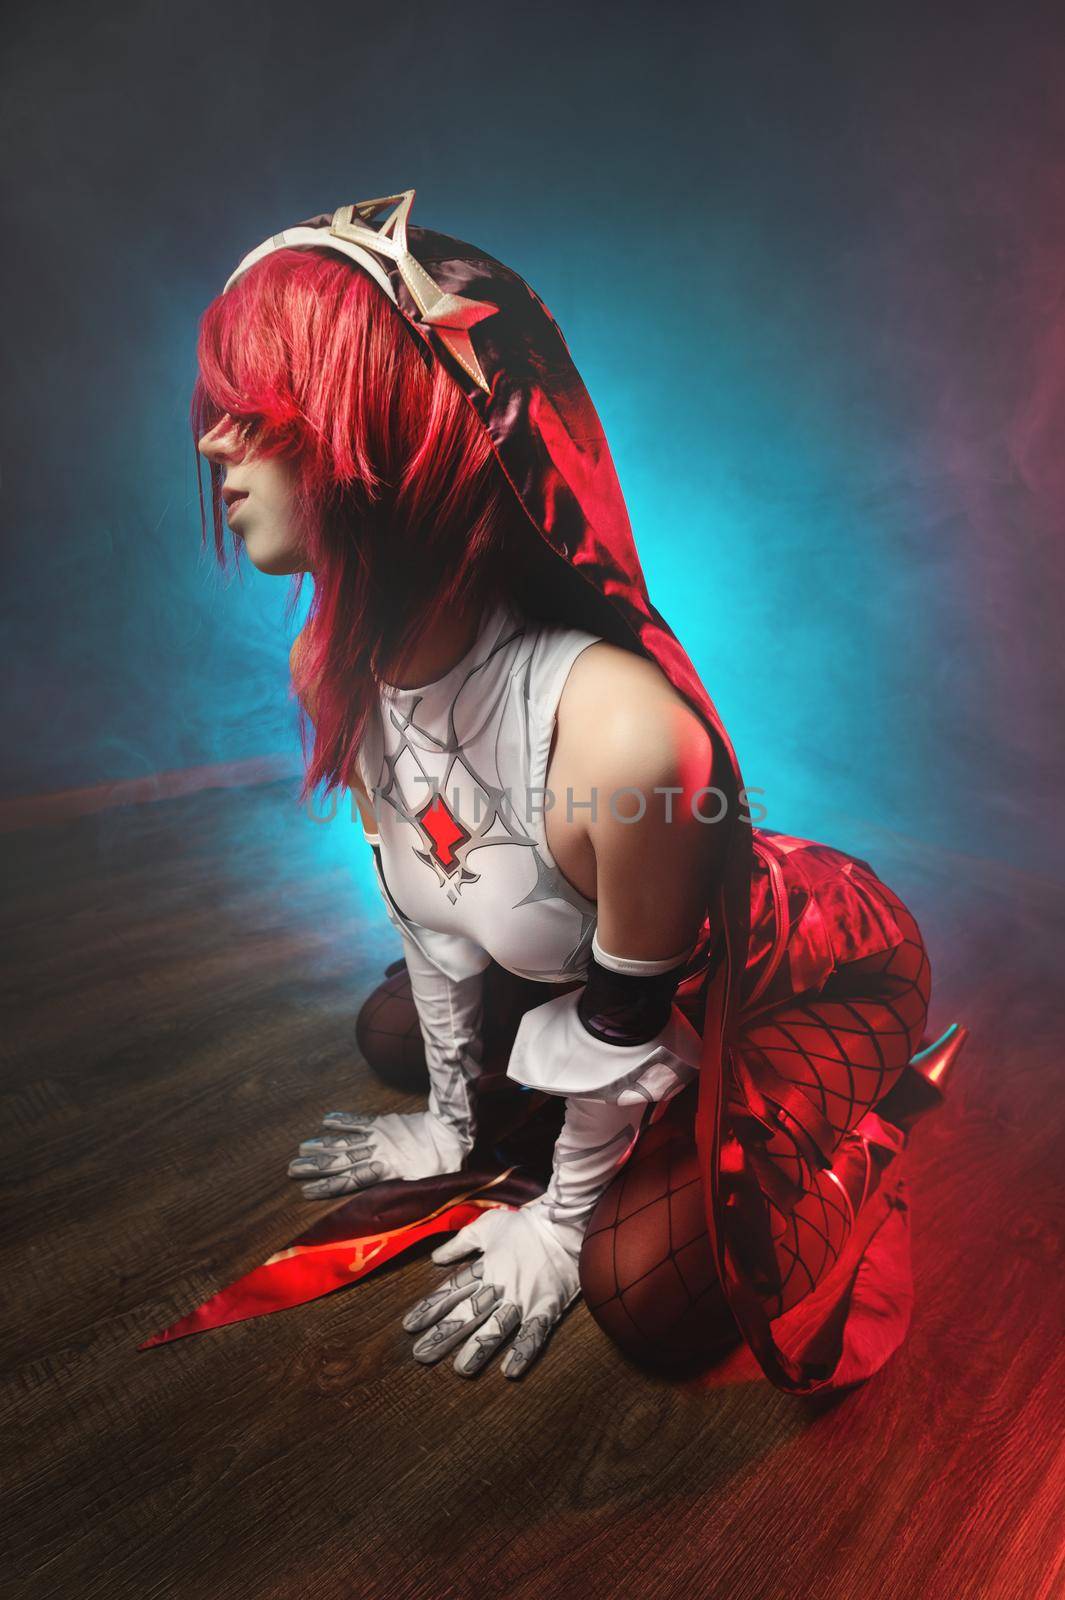 Cosplay. Studio portrait of attractive sexy young woman in anime rosary costume with red hairs and white gloves. Sexual pose on the floor in colored light.